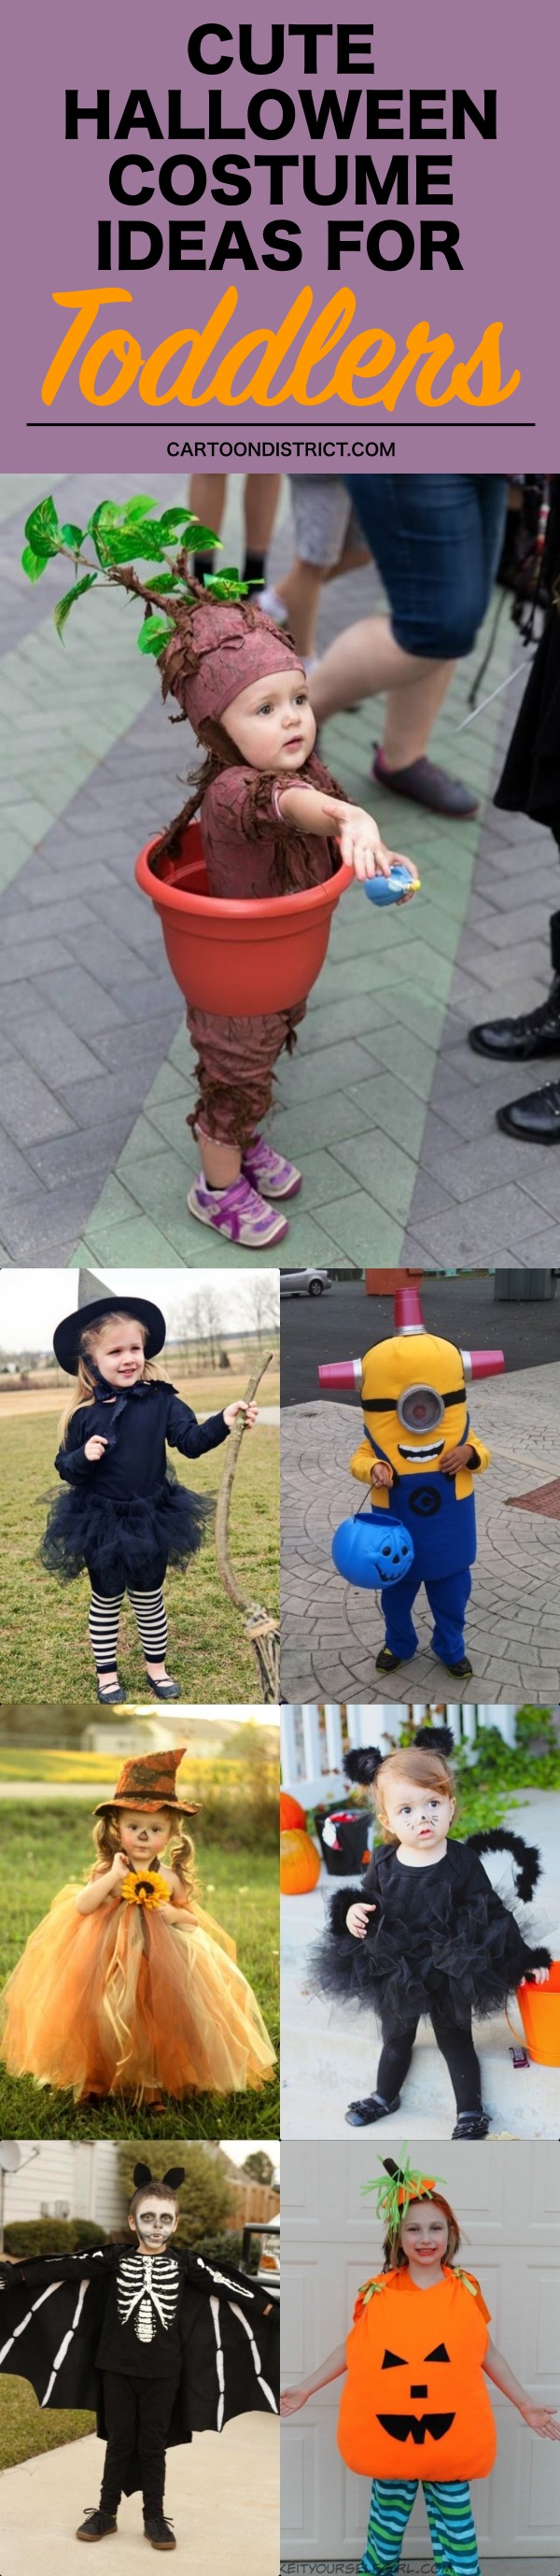 Cute Halloween Costume Ideas for Toddlers